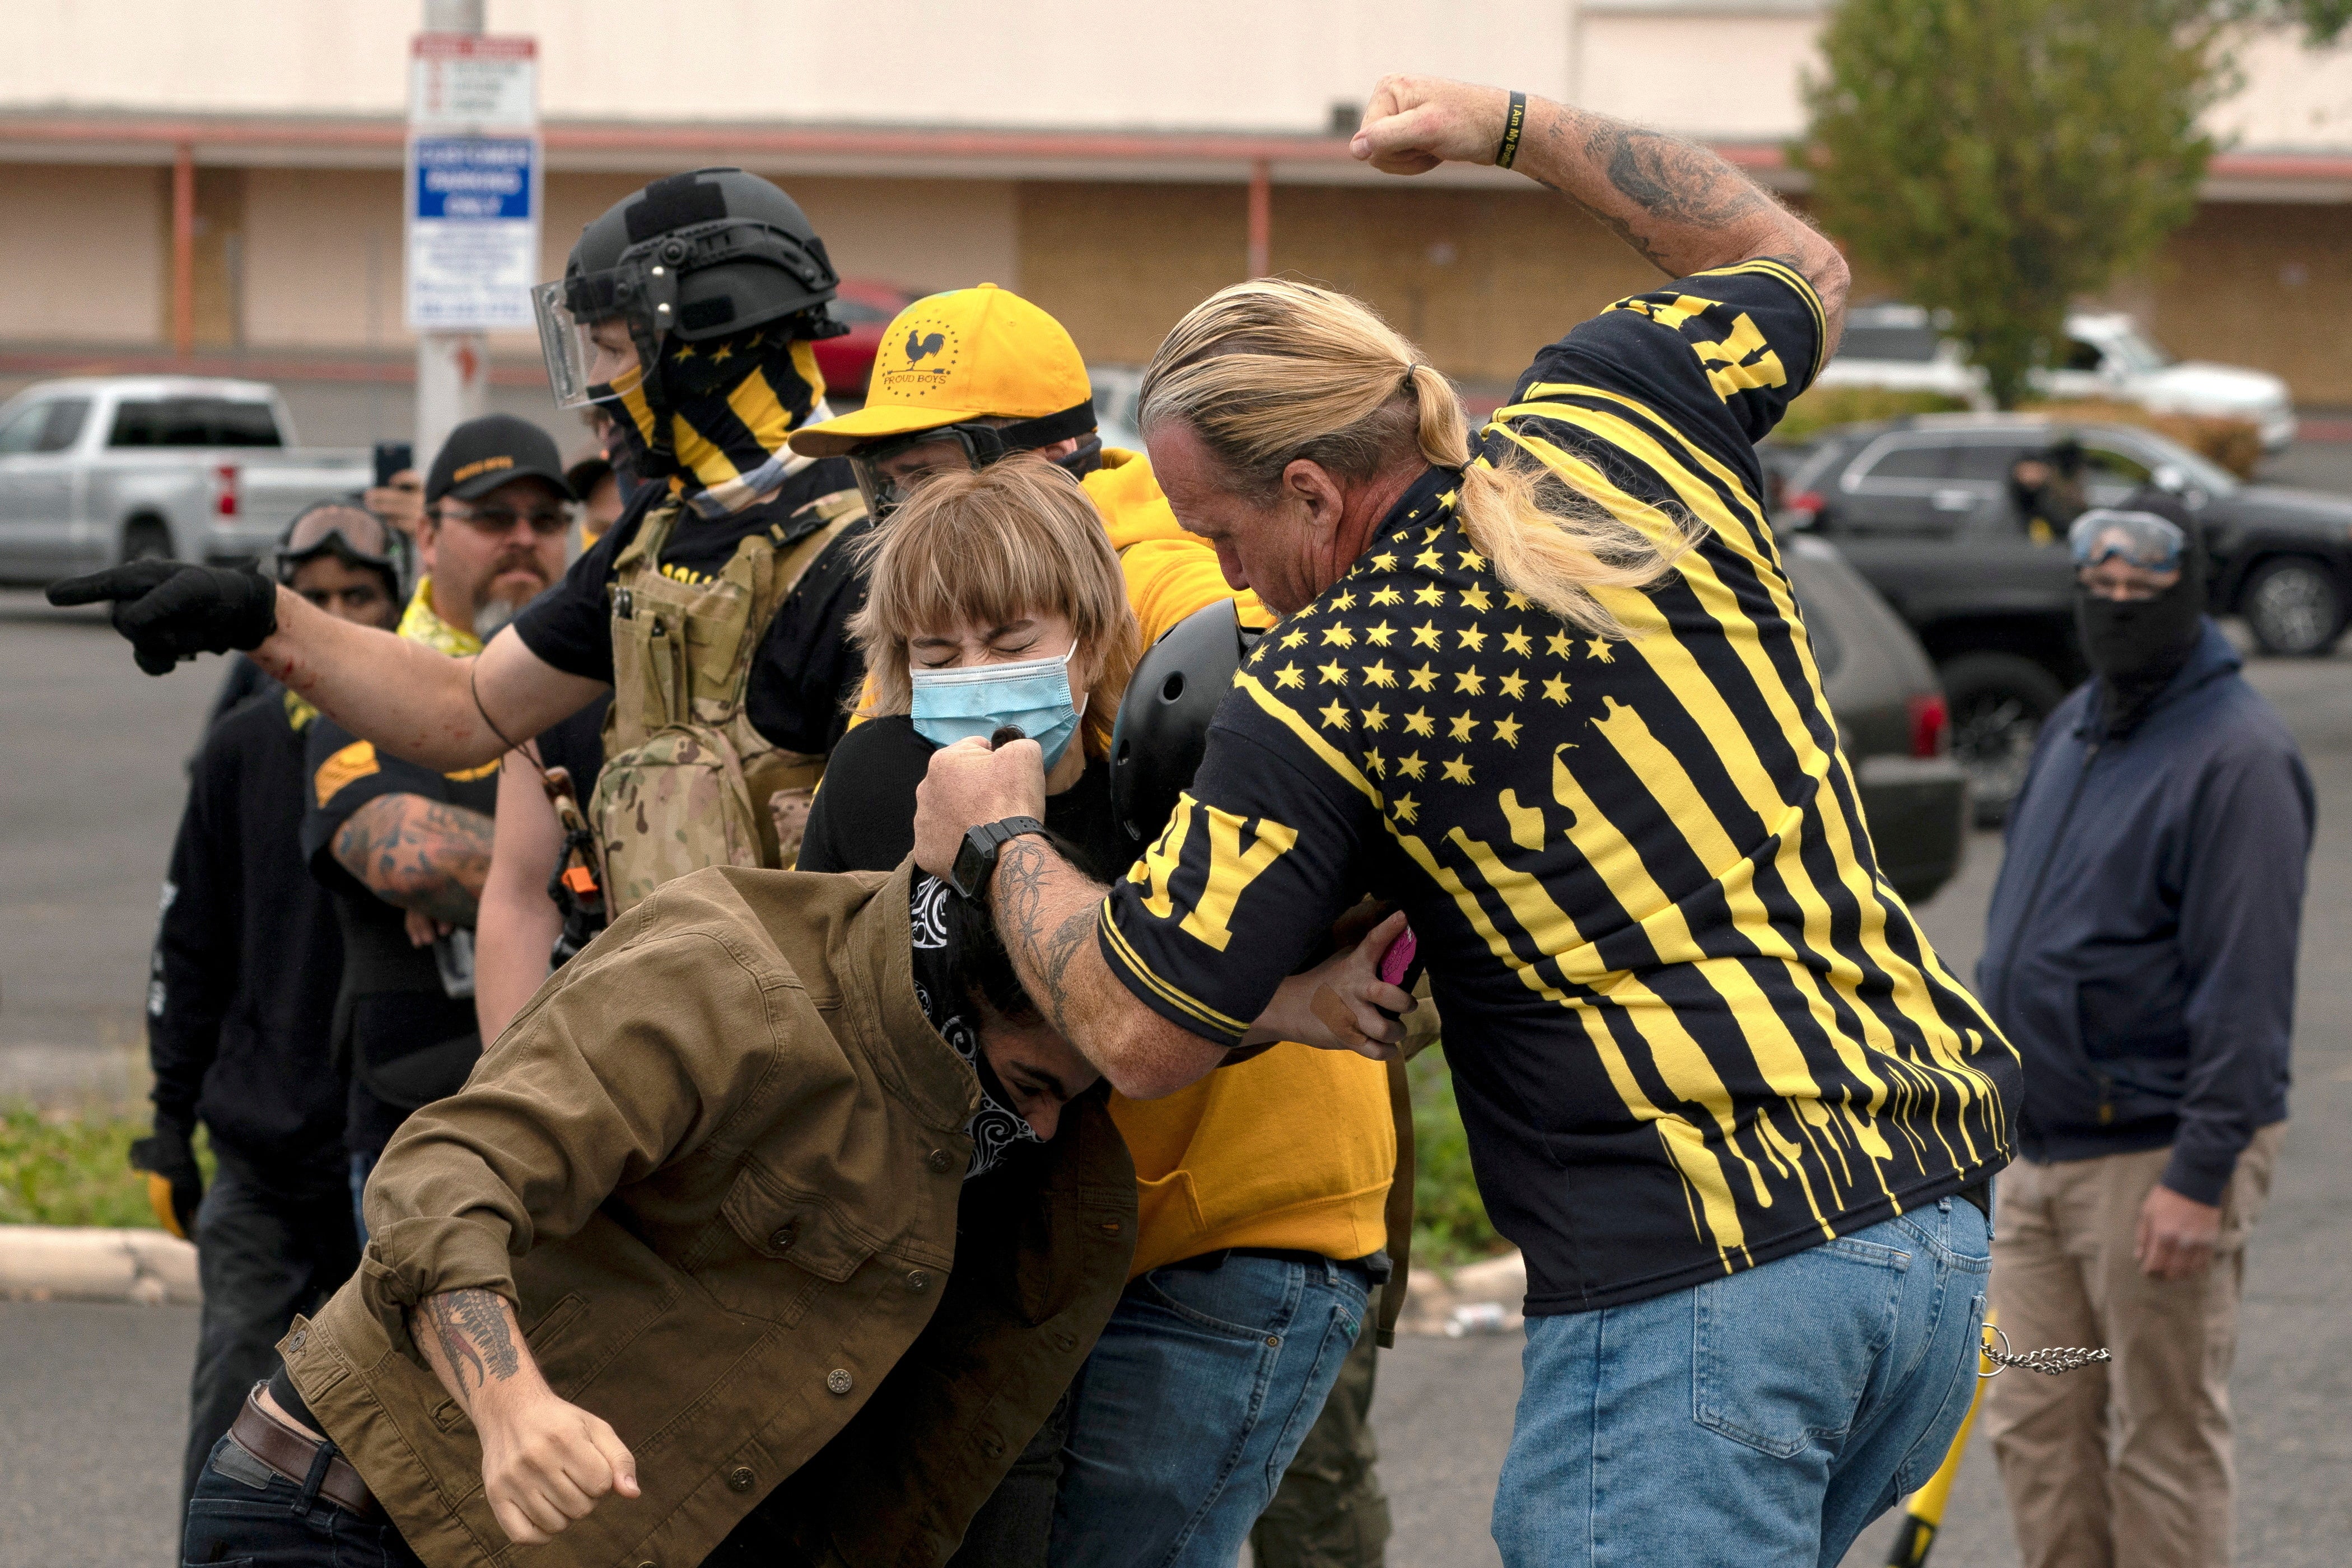 Members of the far-right Proud Boys clash with counter-protesters during rival rallies in Portland, Oregon, U.S., August 22, 2021